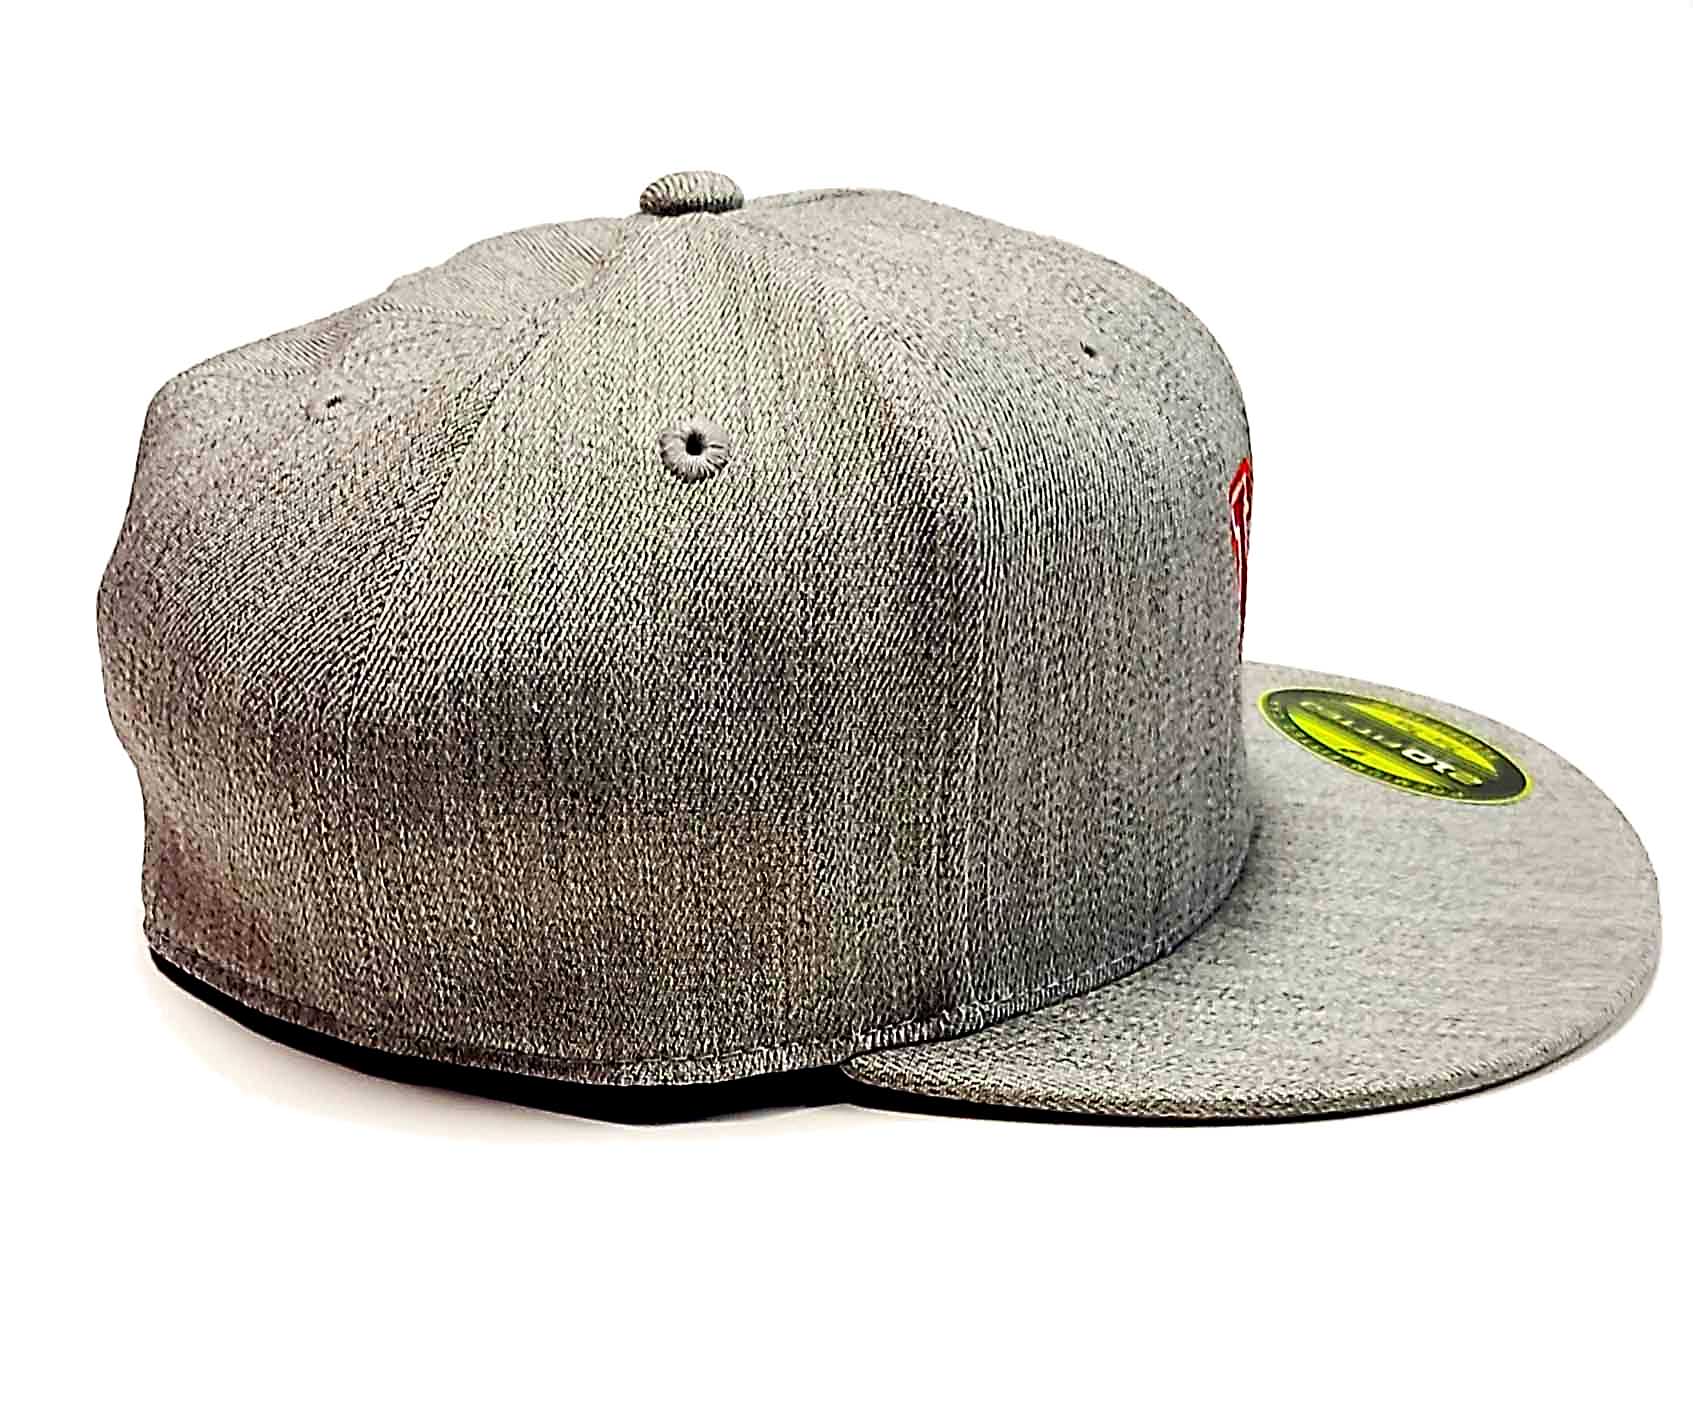 University of Houston heather grey Semi Fitted Flexfit 6210 cap side view